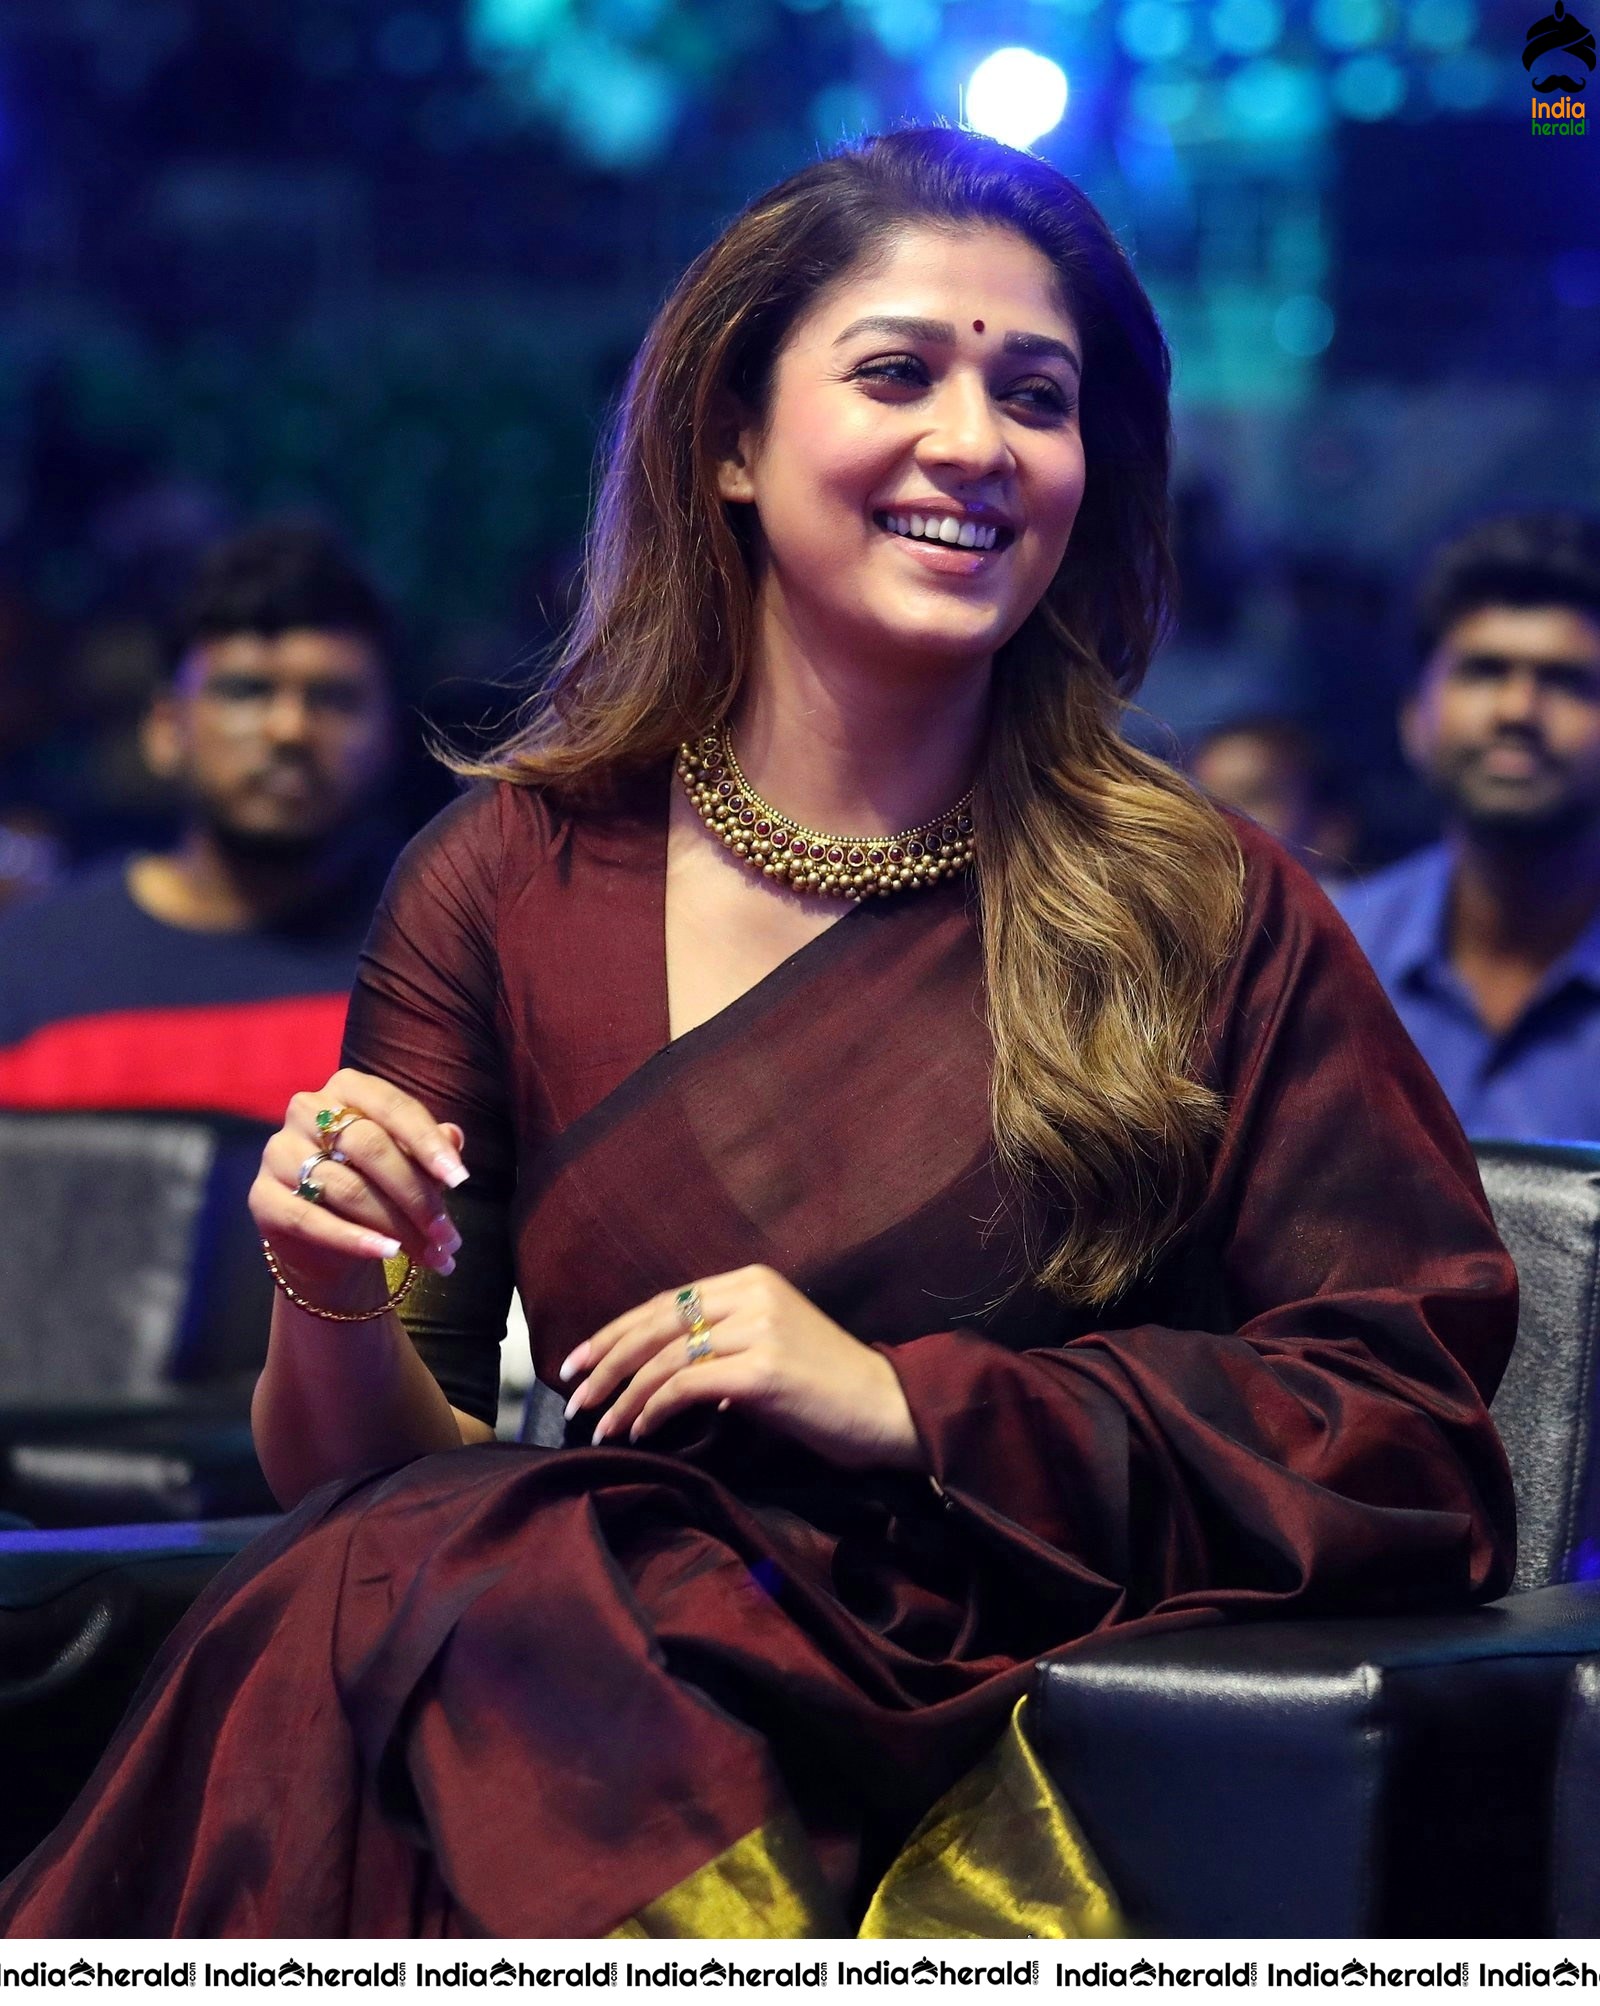 More Photos of Nayanthara from Zee Awards